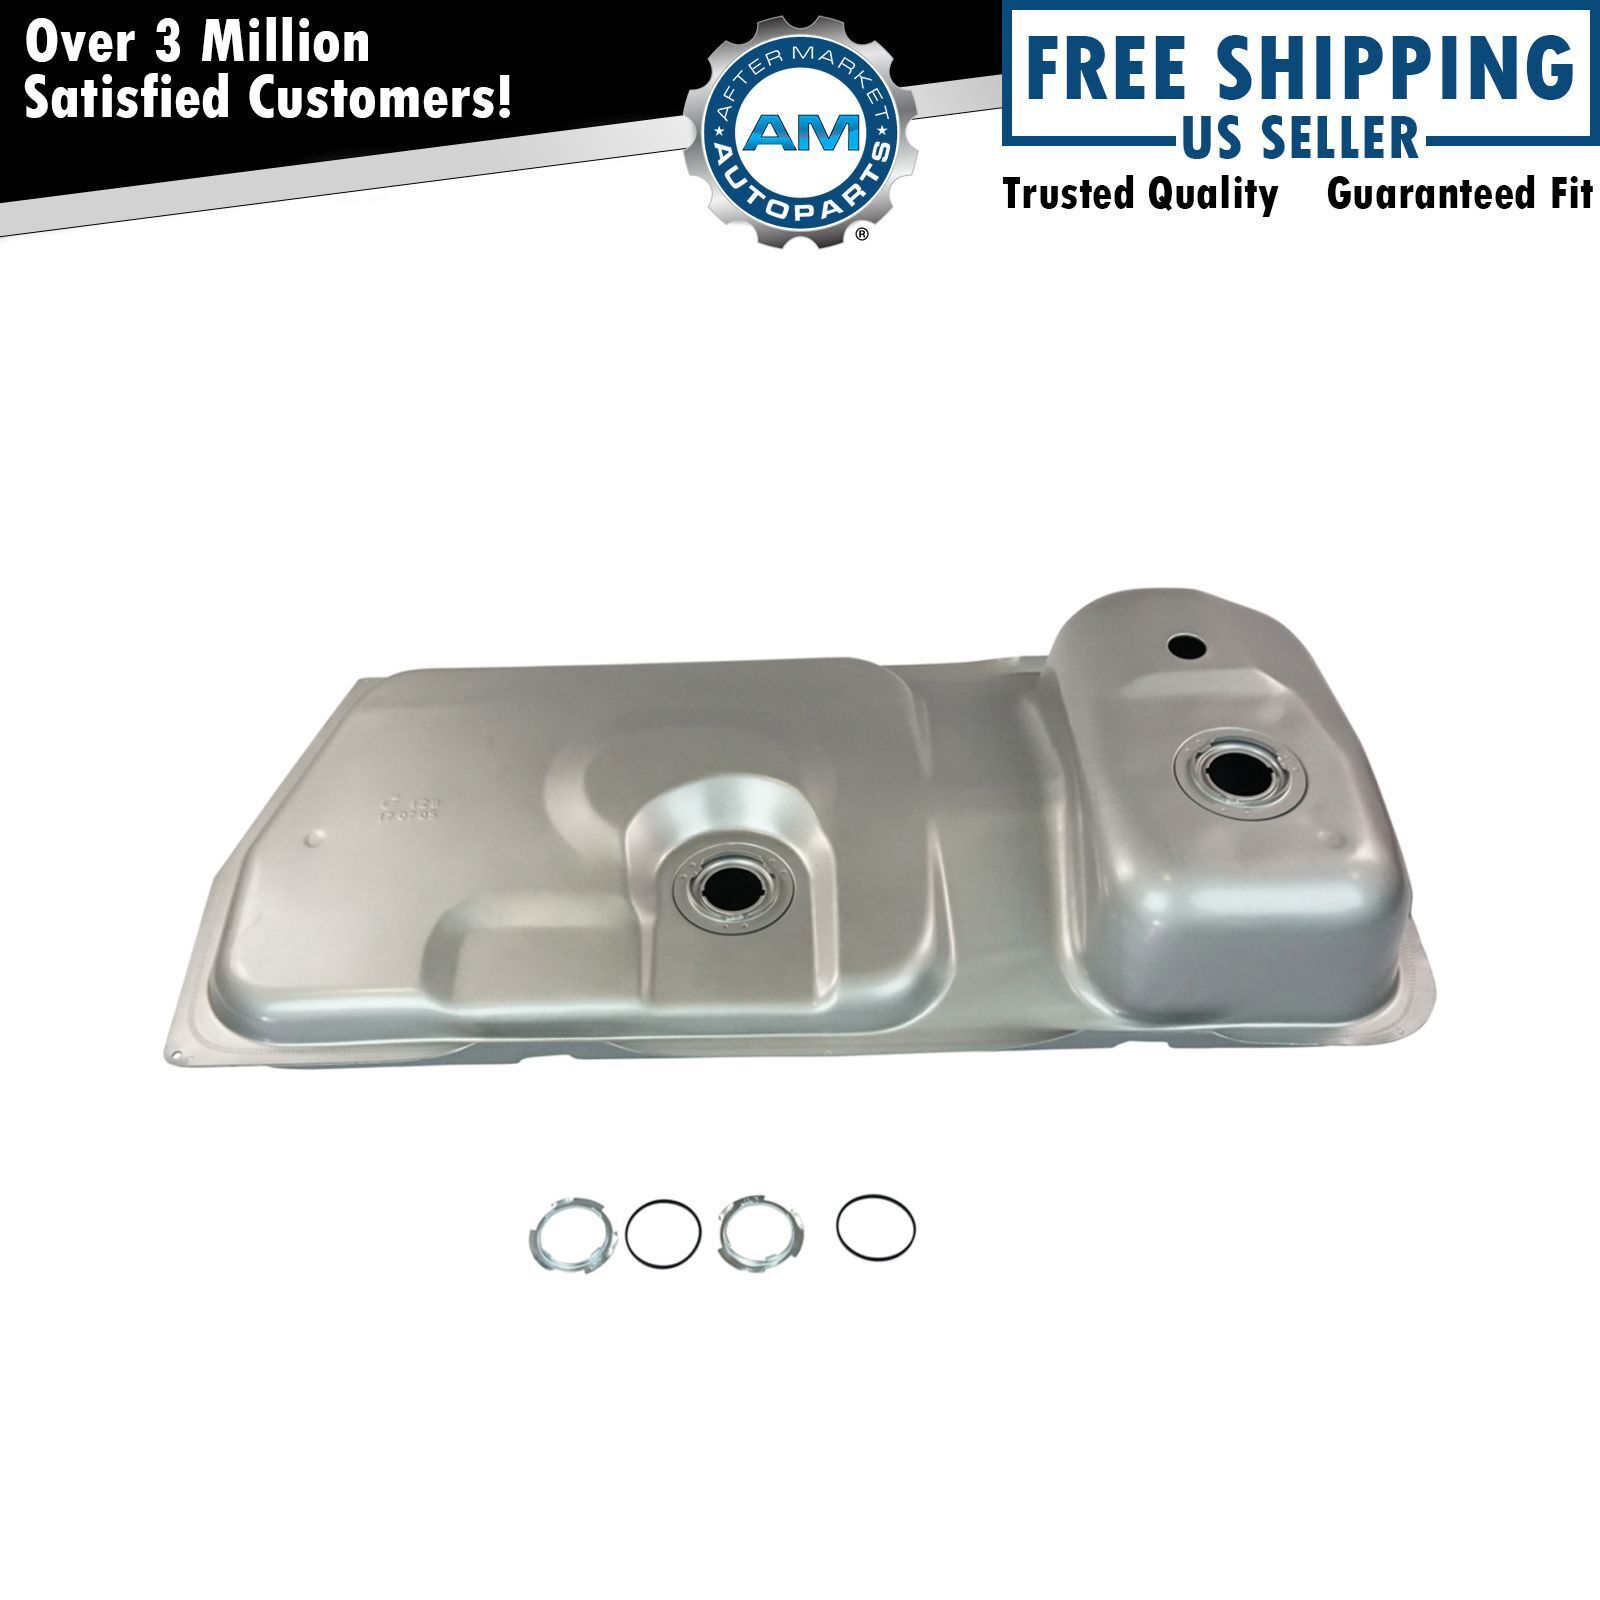 Fuel Gas Tank 15.4 Gallon NEW for Ford Mustang Capri w/ Fuel Injection